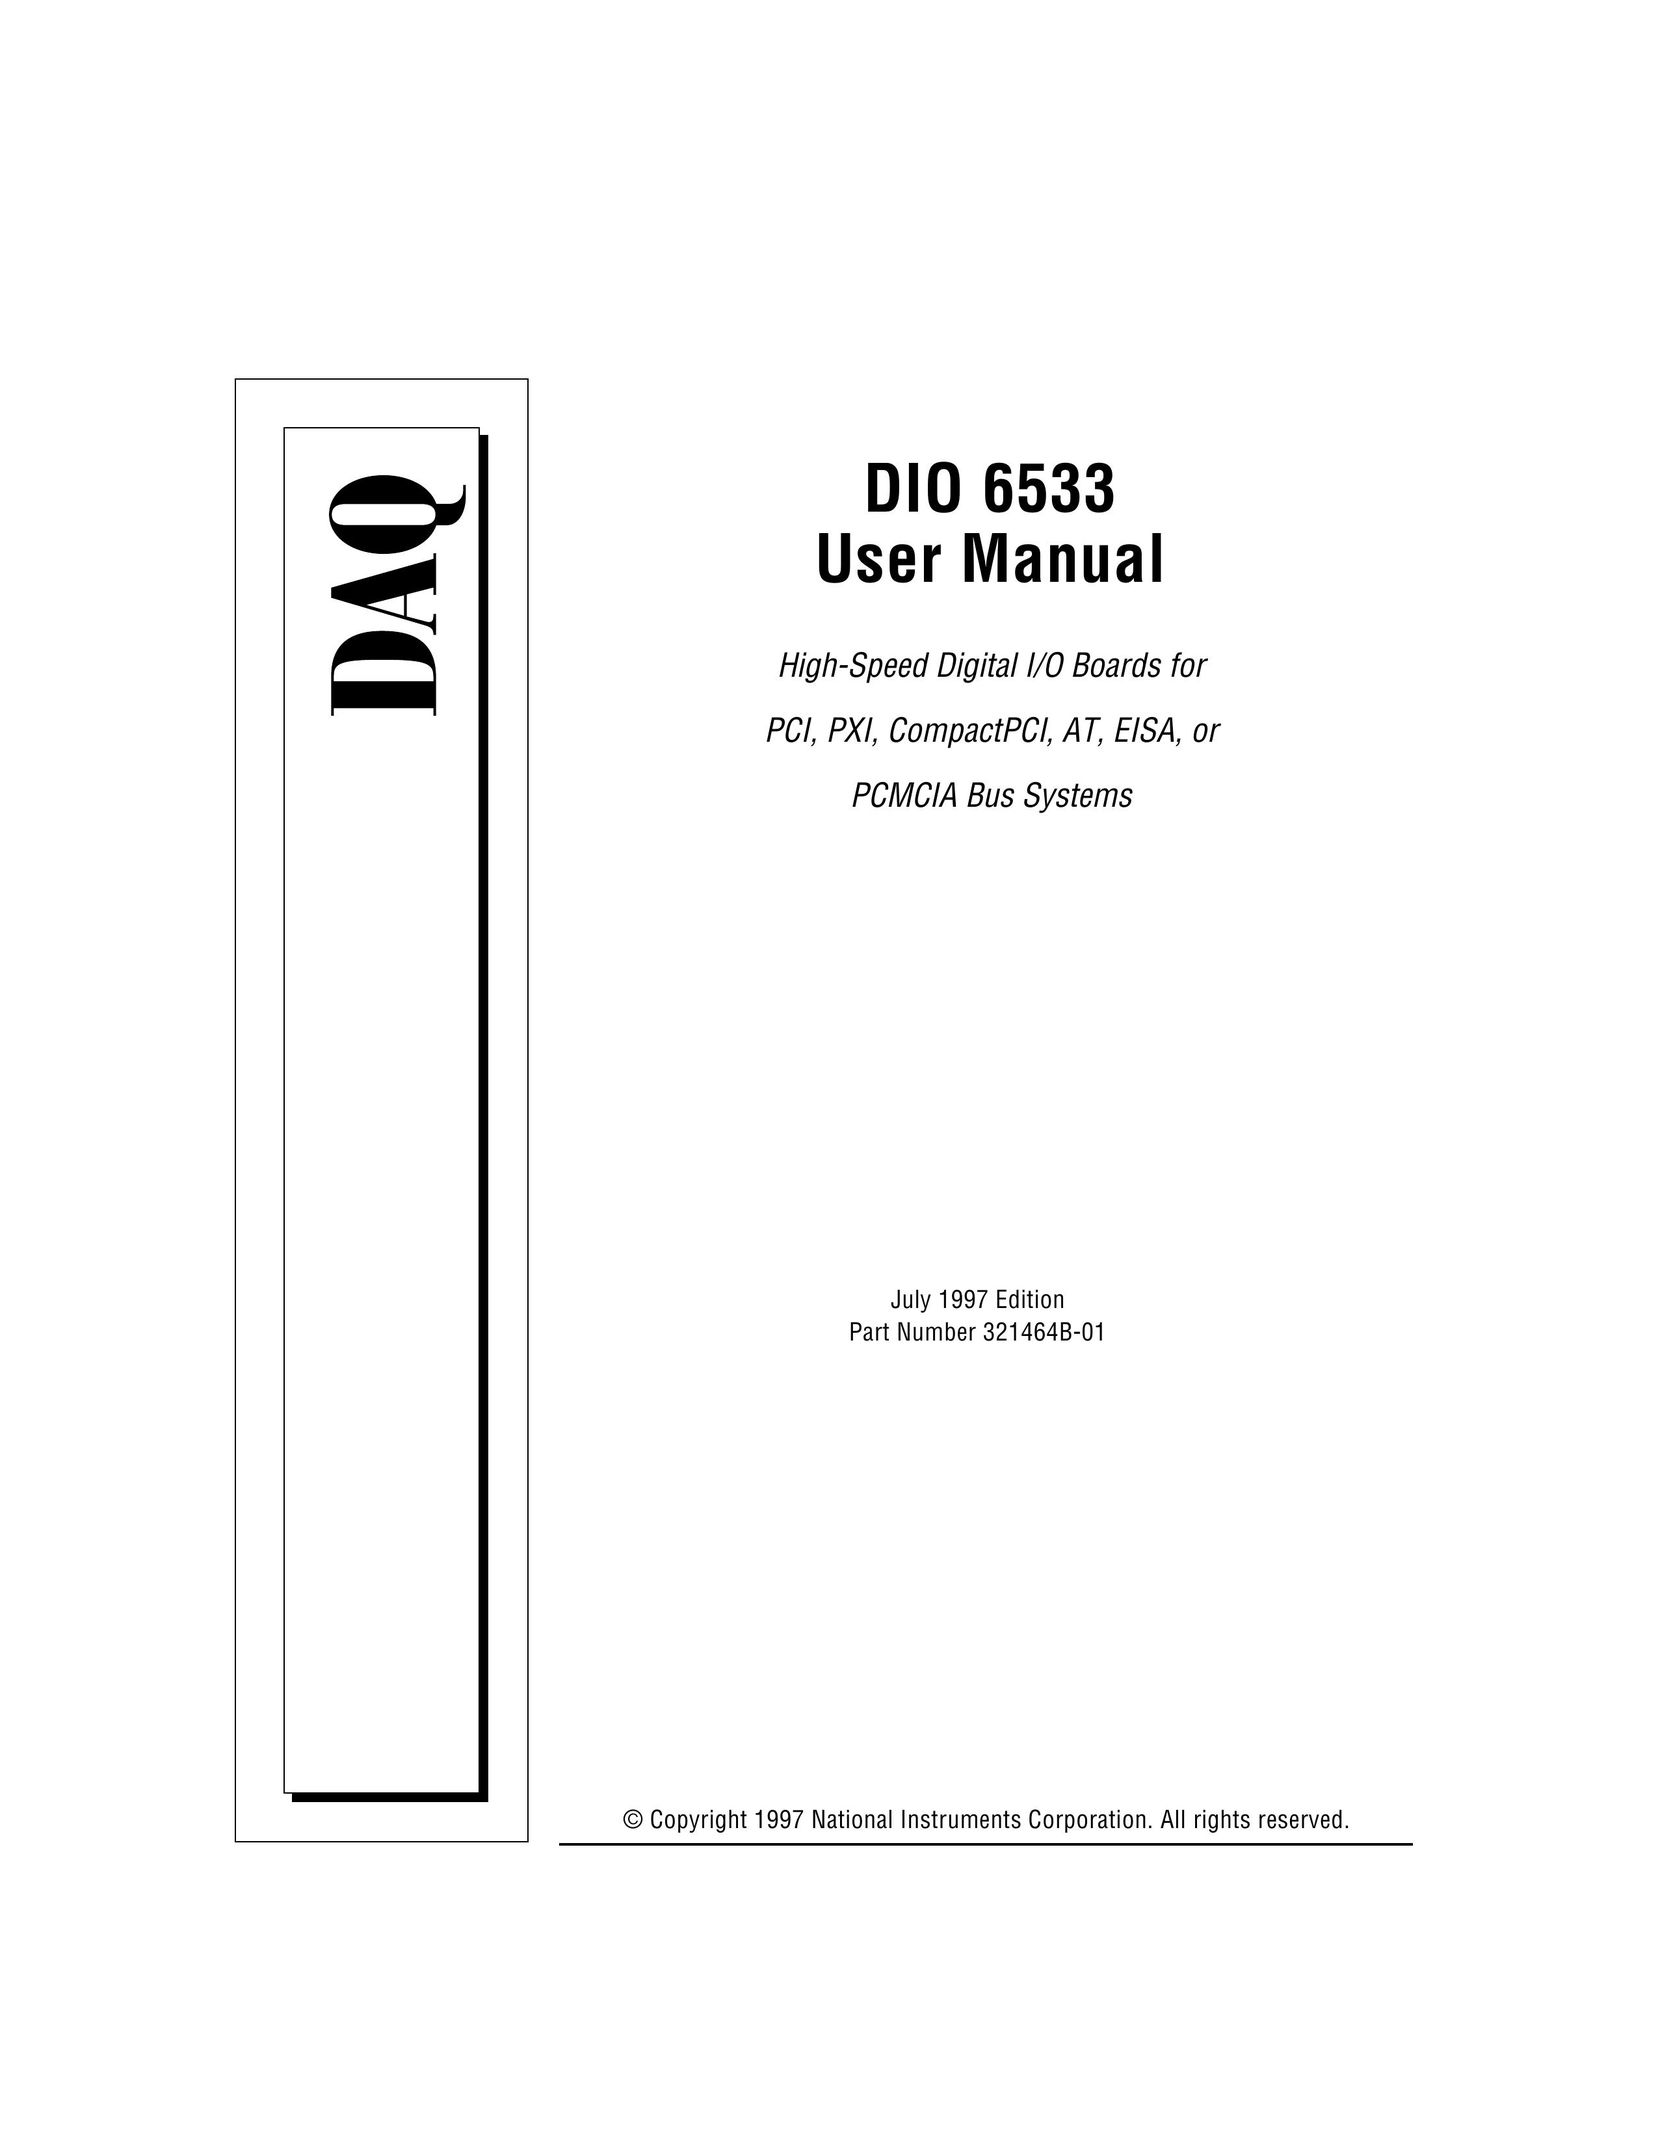 National Instruments DIO 6533 Switch User Manual